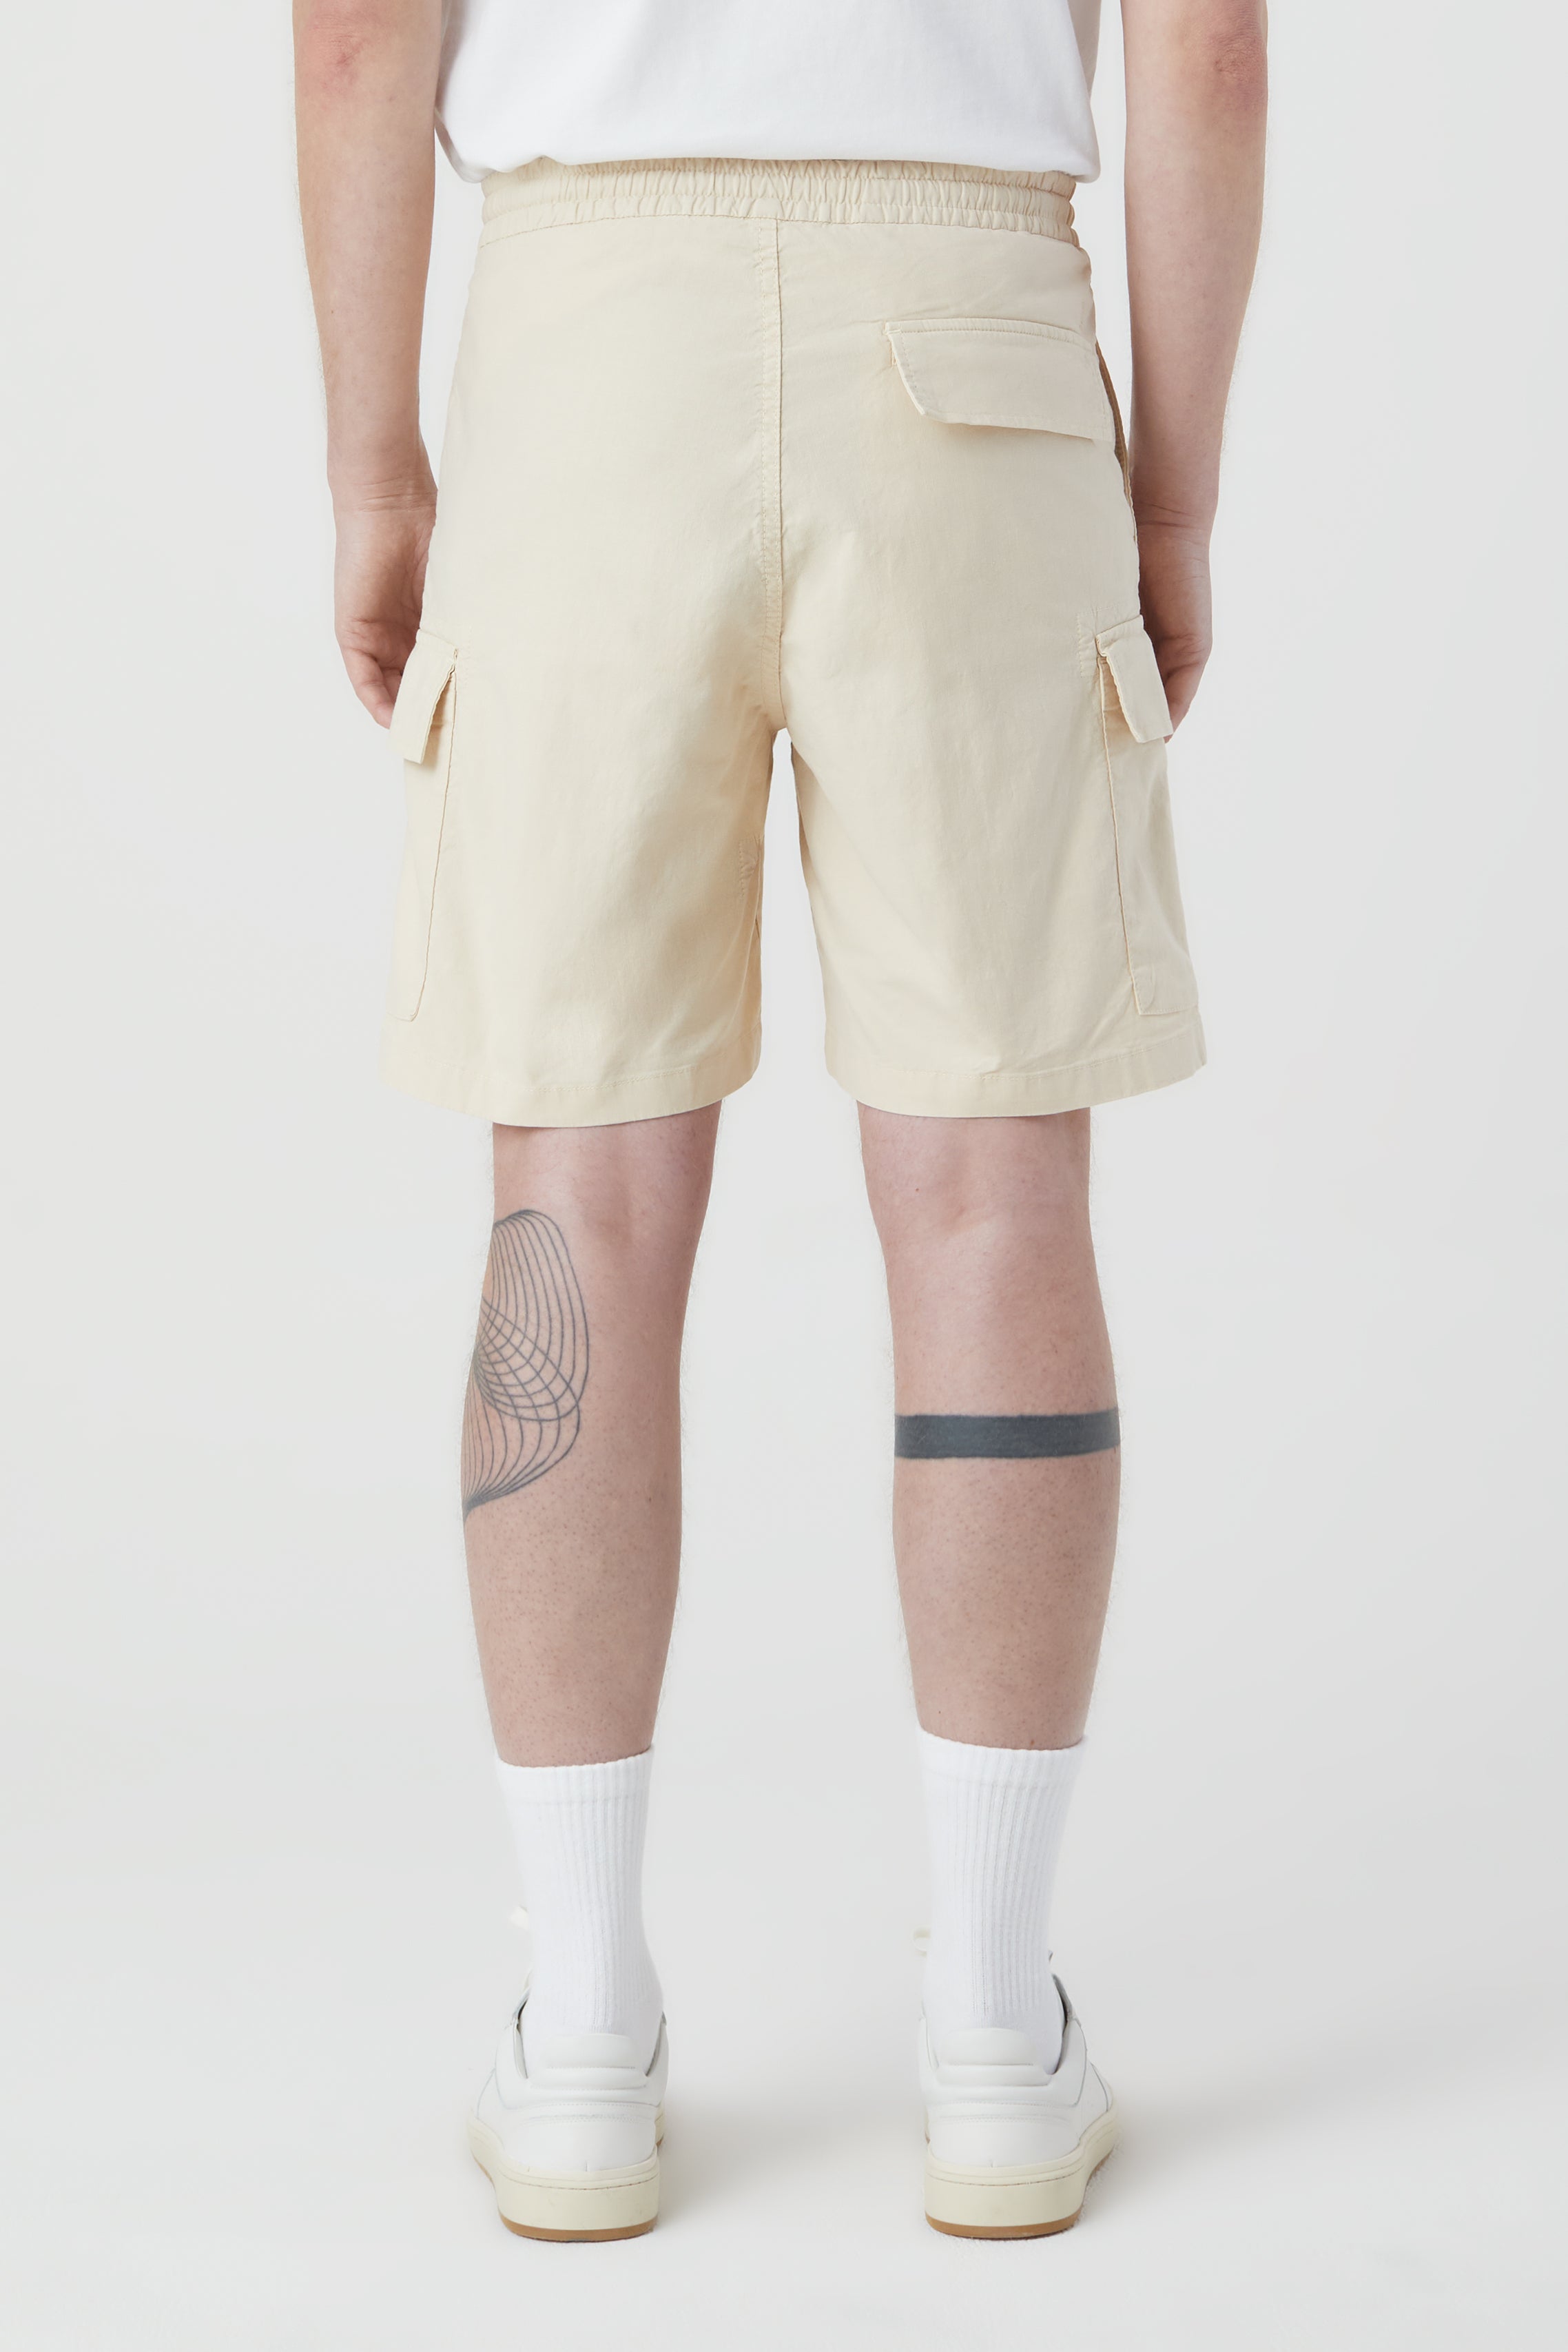 CLOSED-OUTLET-SALE-DRAWSTRING-CARGO-SHORTS-Hosen-ARCHIVE-COLLECTION-4_01298ddf-0642-4c58-8196-8f9a3073589b.jpg